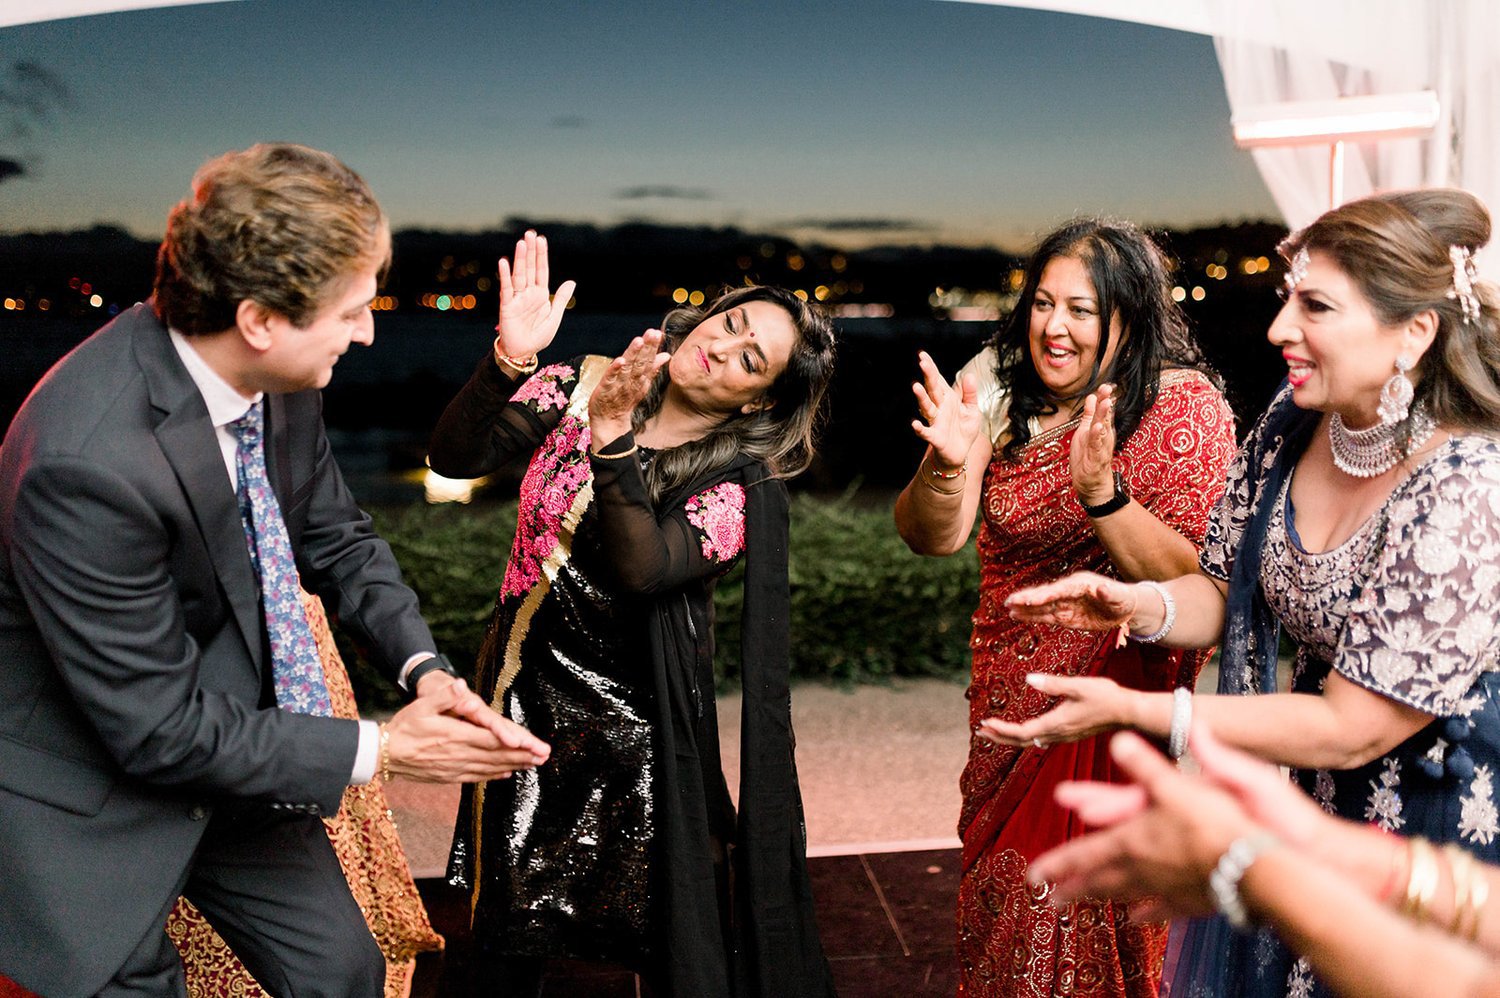 Wedding guest dance during a reception in Victoria BC